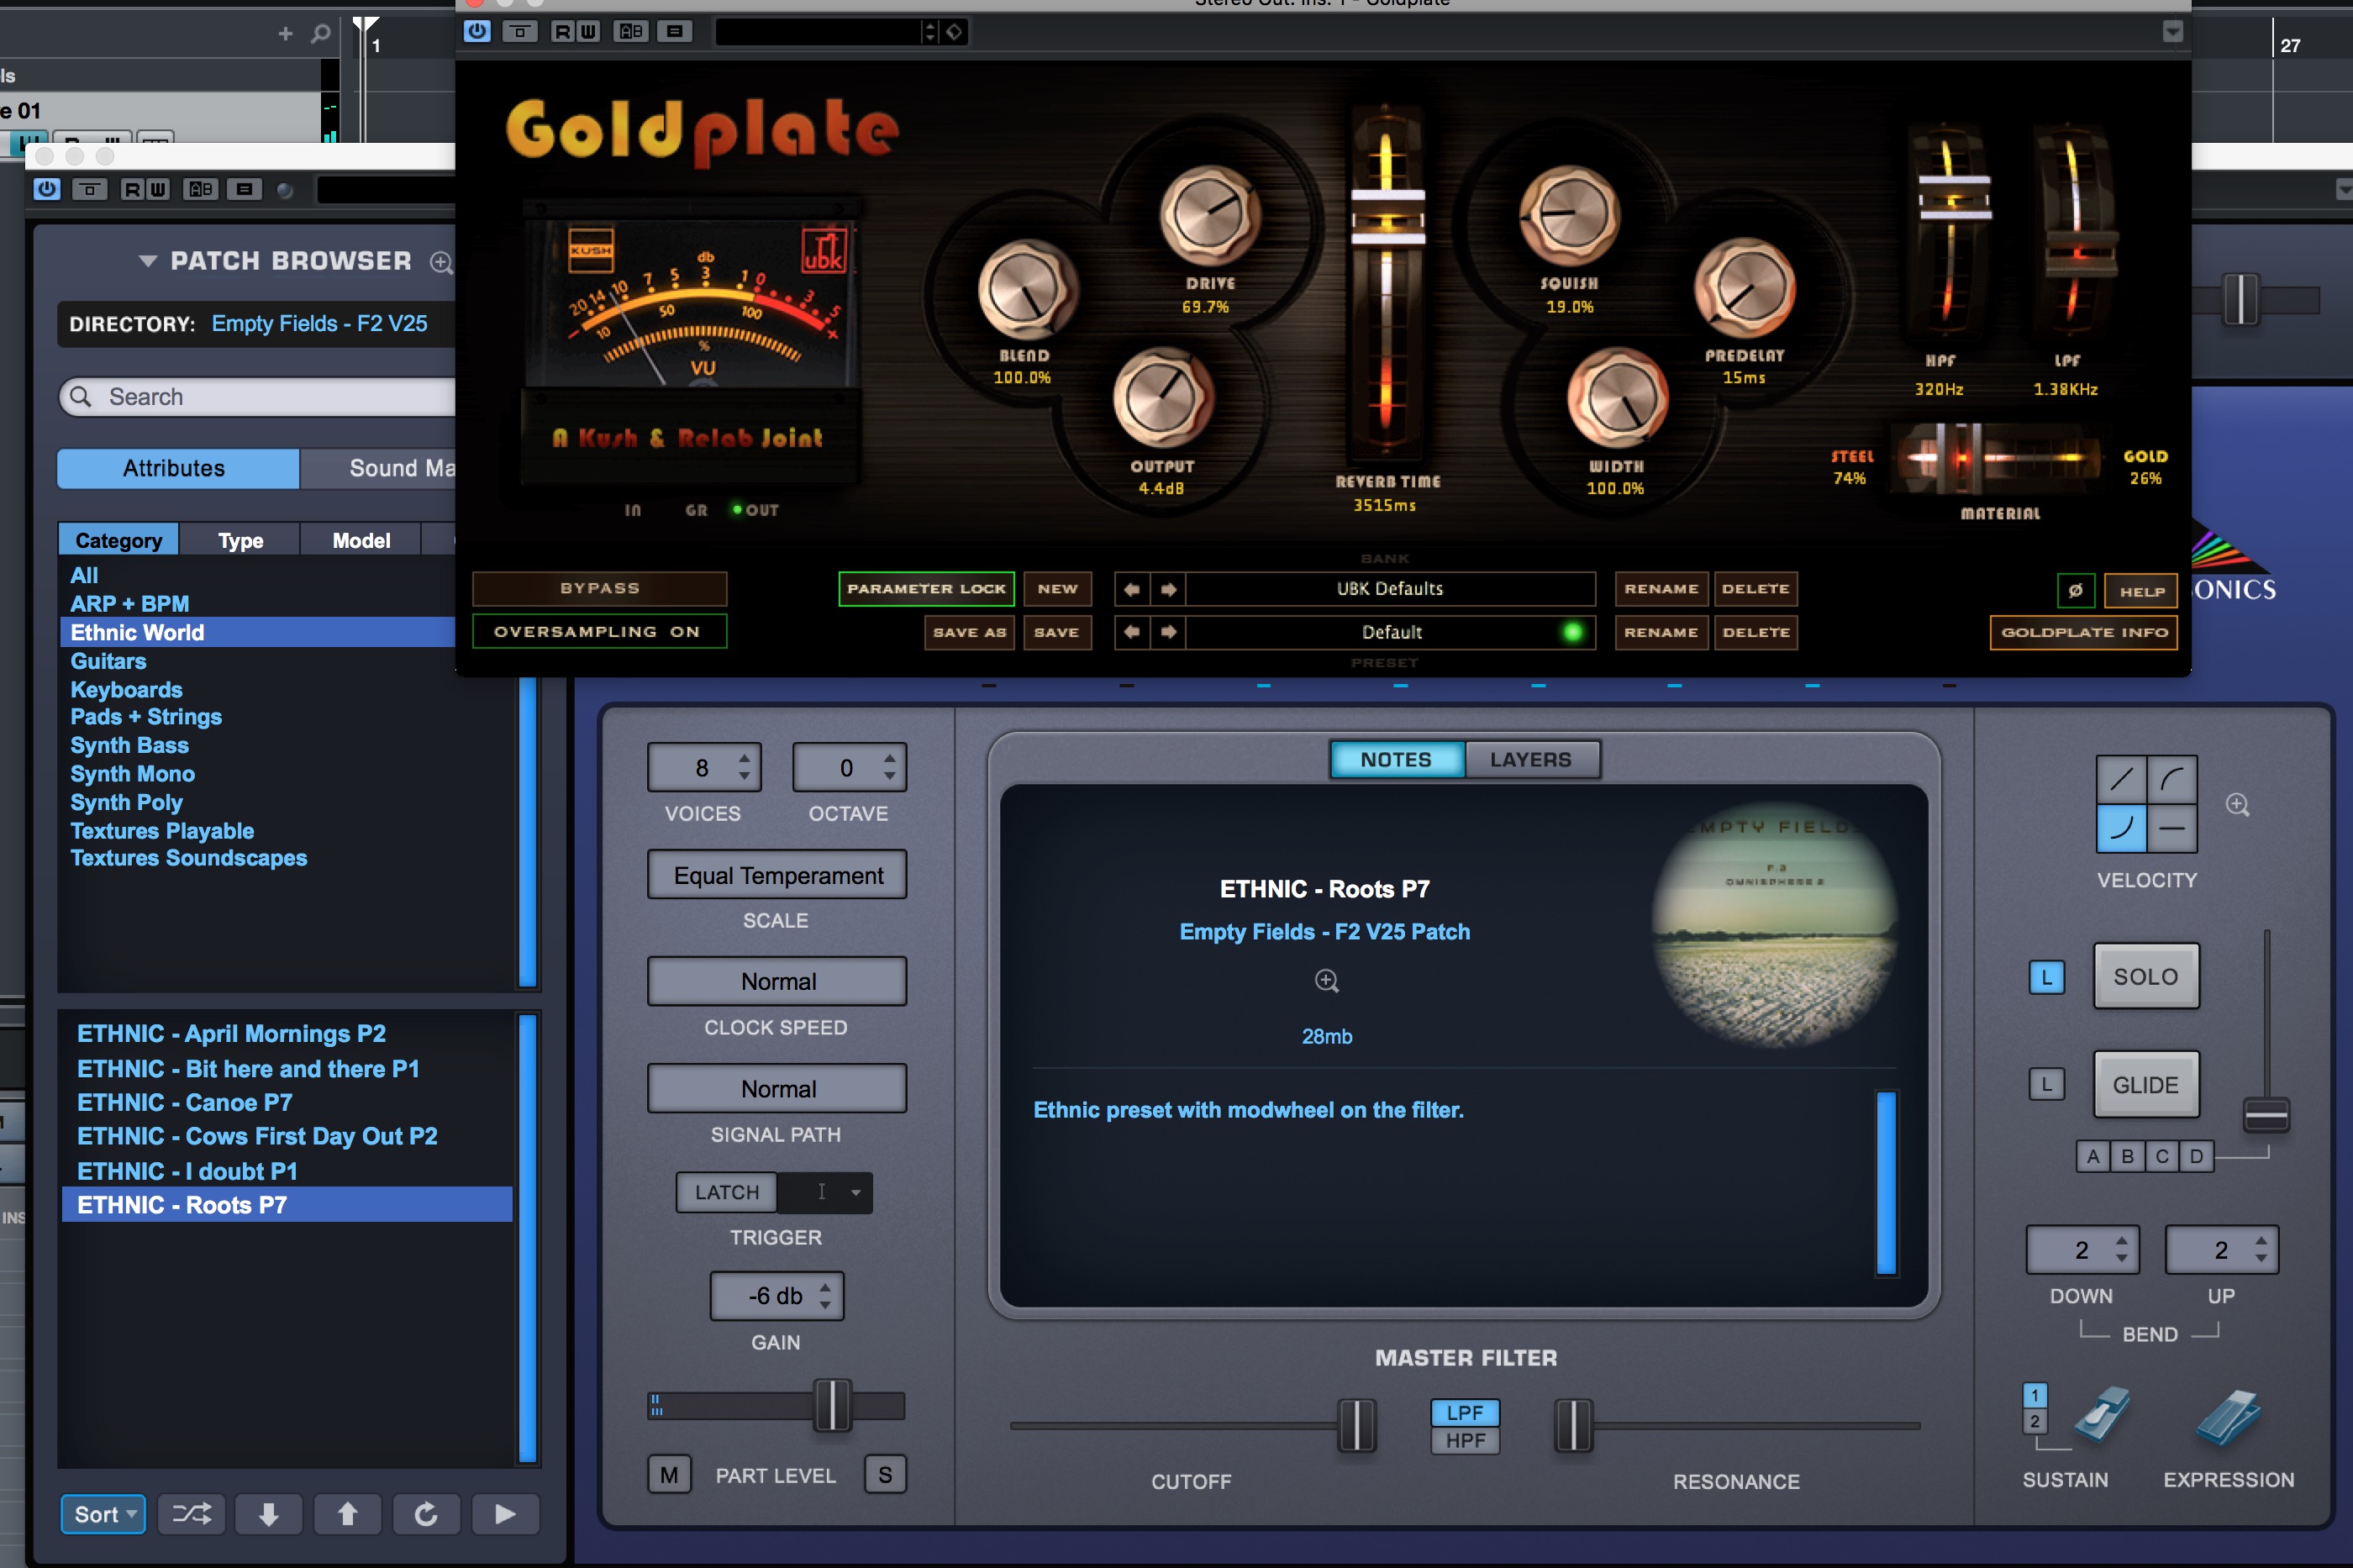 GOLDPLATE DYNAMIC PLATE REVERB by The House of Kush used with Empty Fields F2